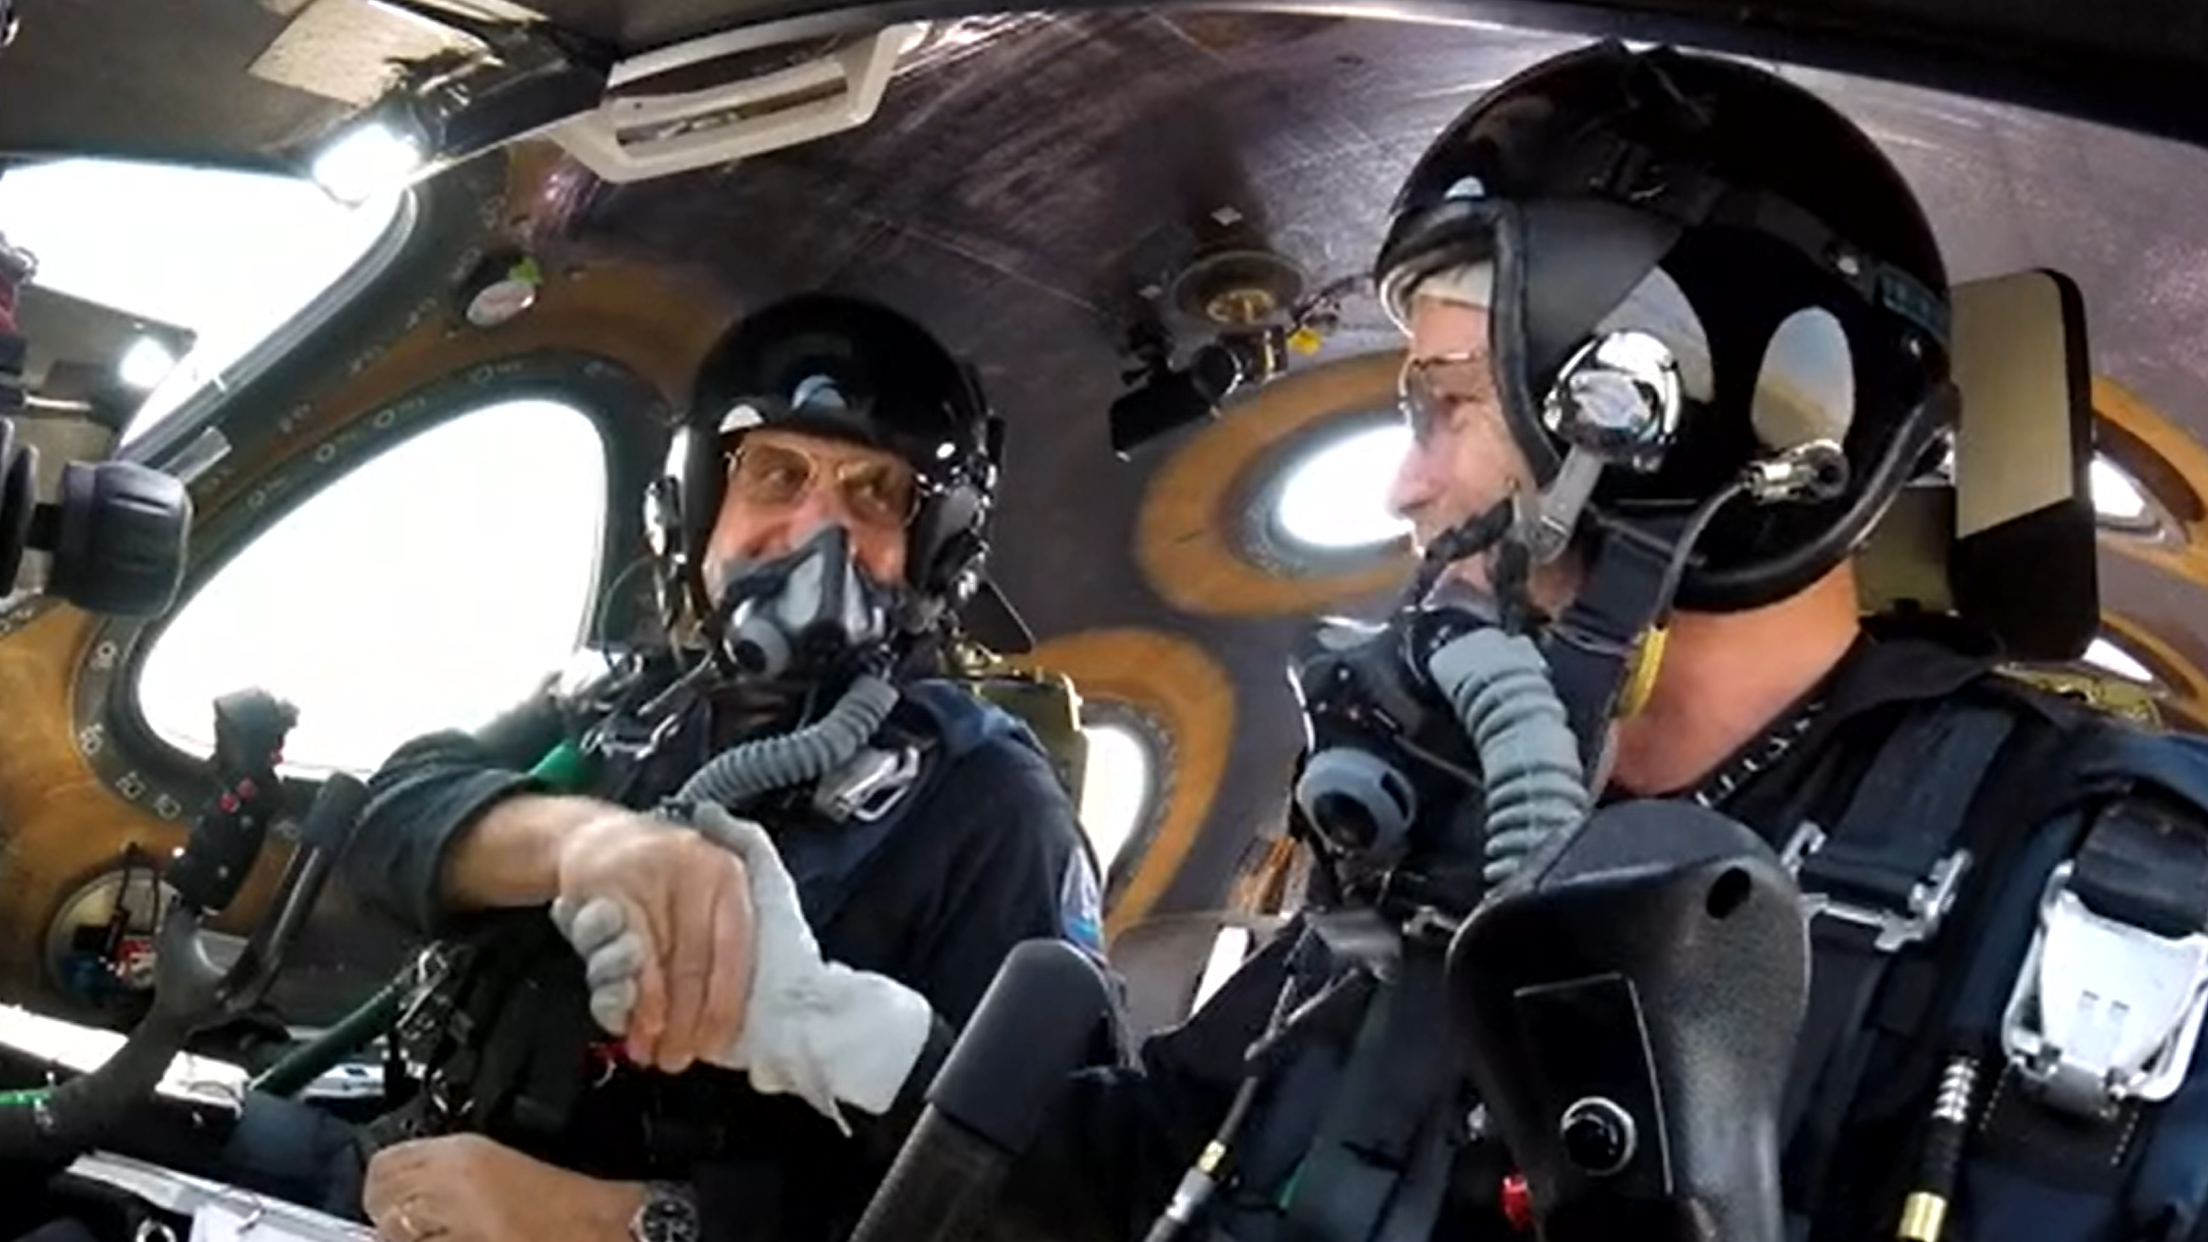 two pilots in a cockpit wearing helmets, masks and other equipment. they shake hands. windows are visible in the background